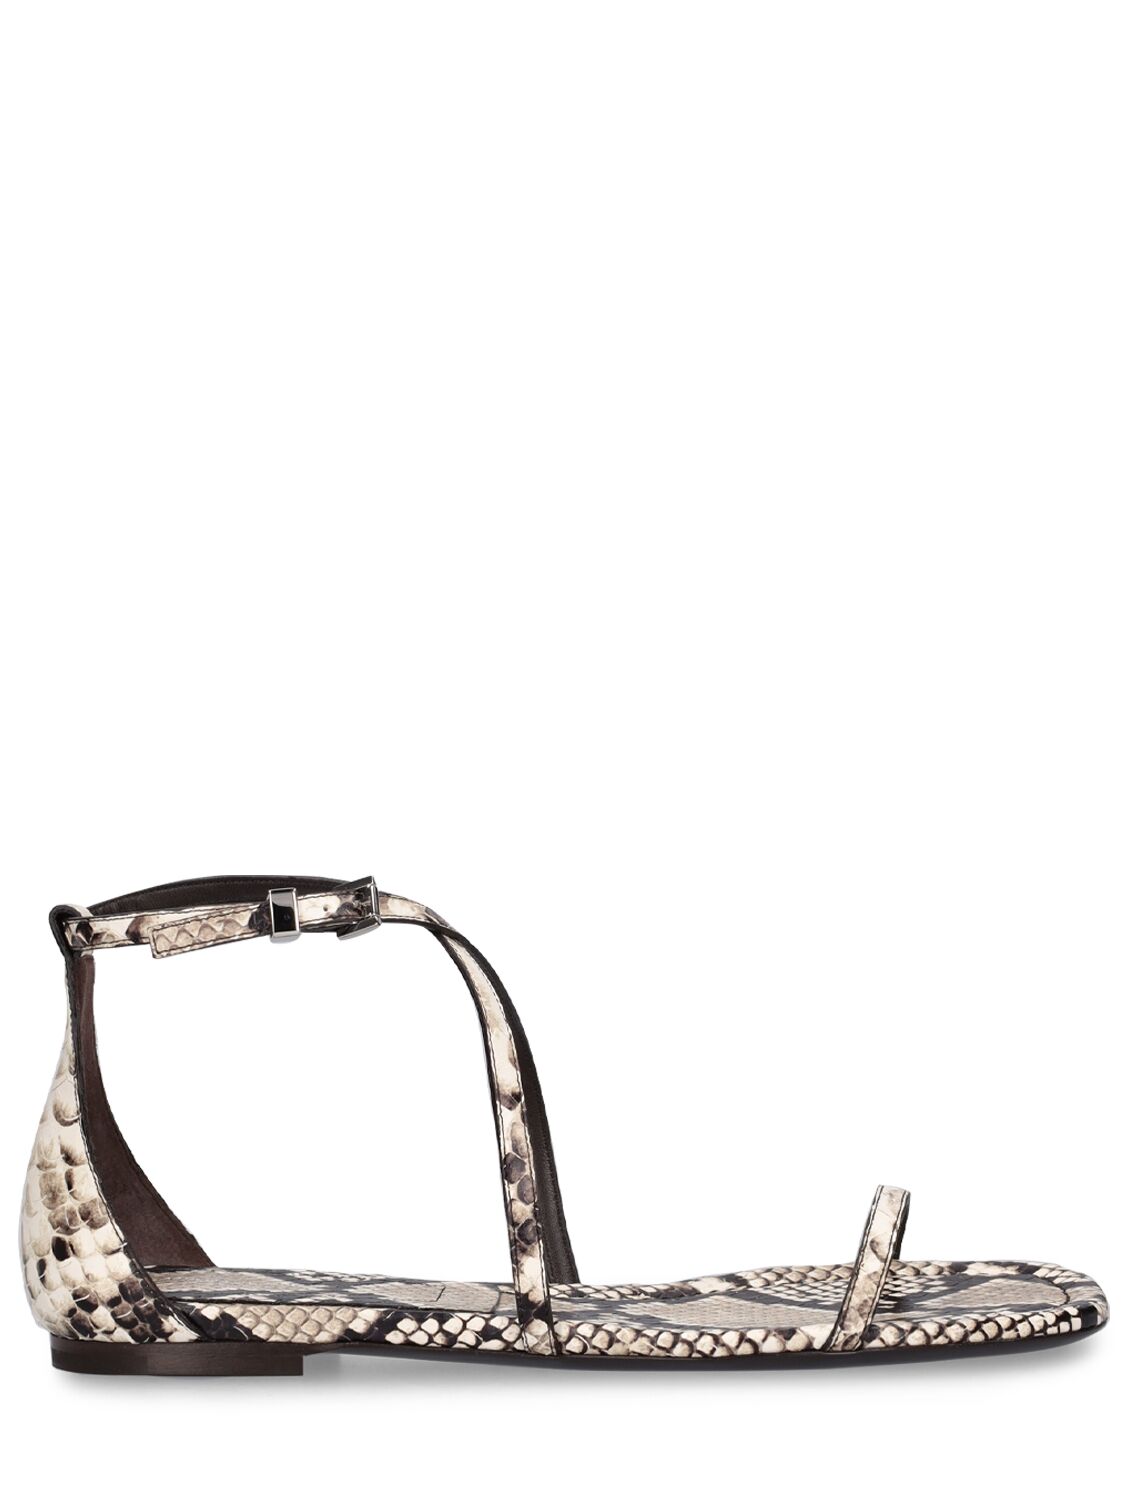 Image of 5mm Polly Runway Python Print Sandals